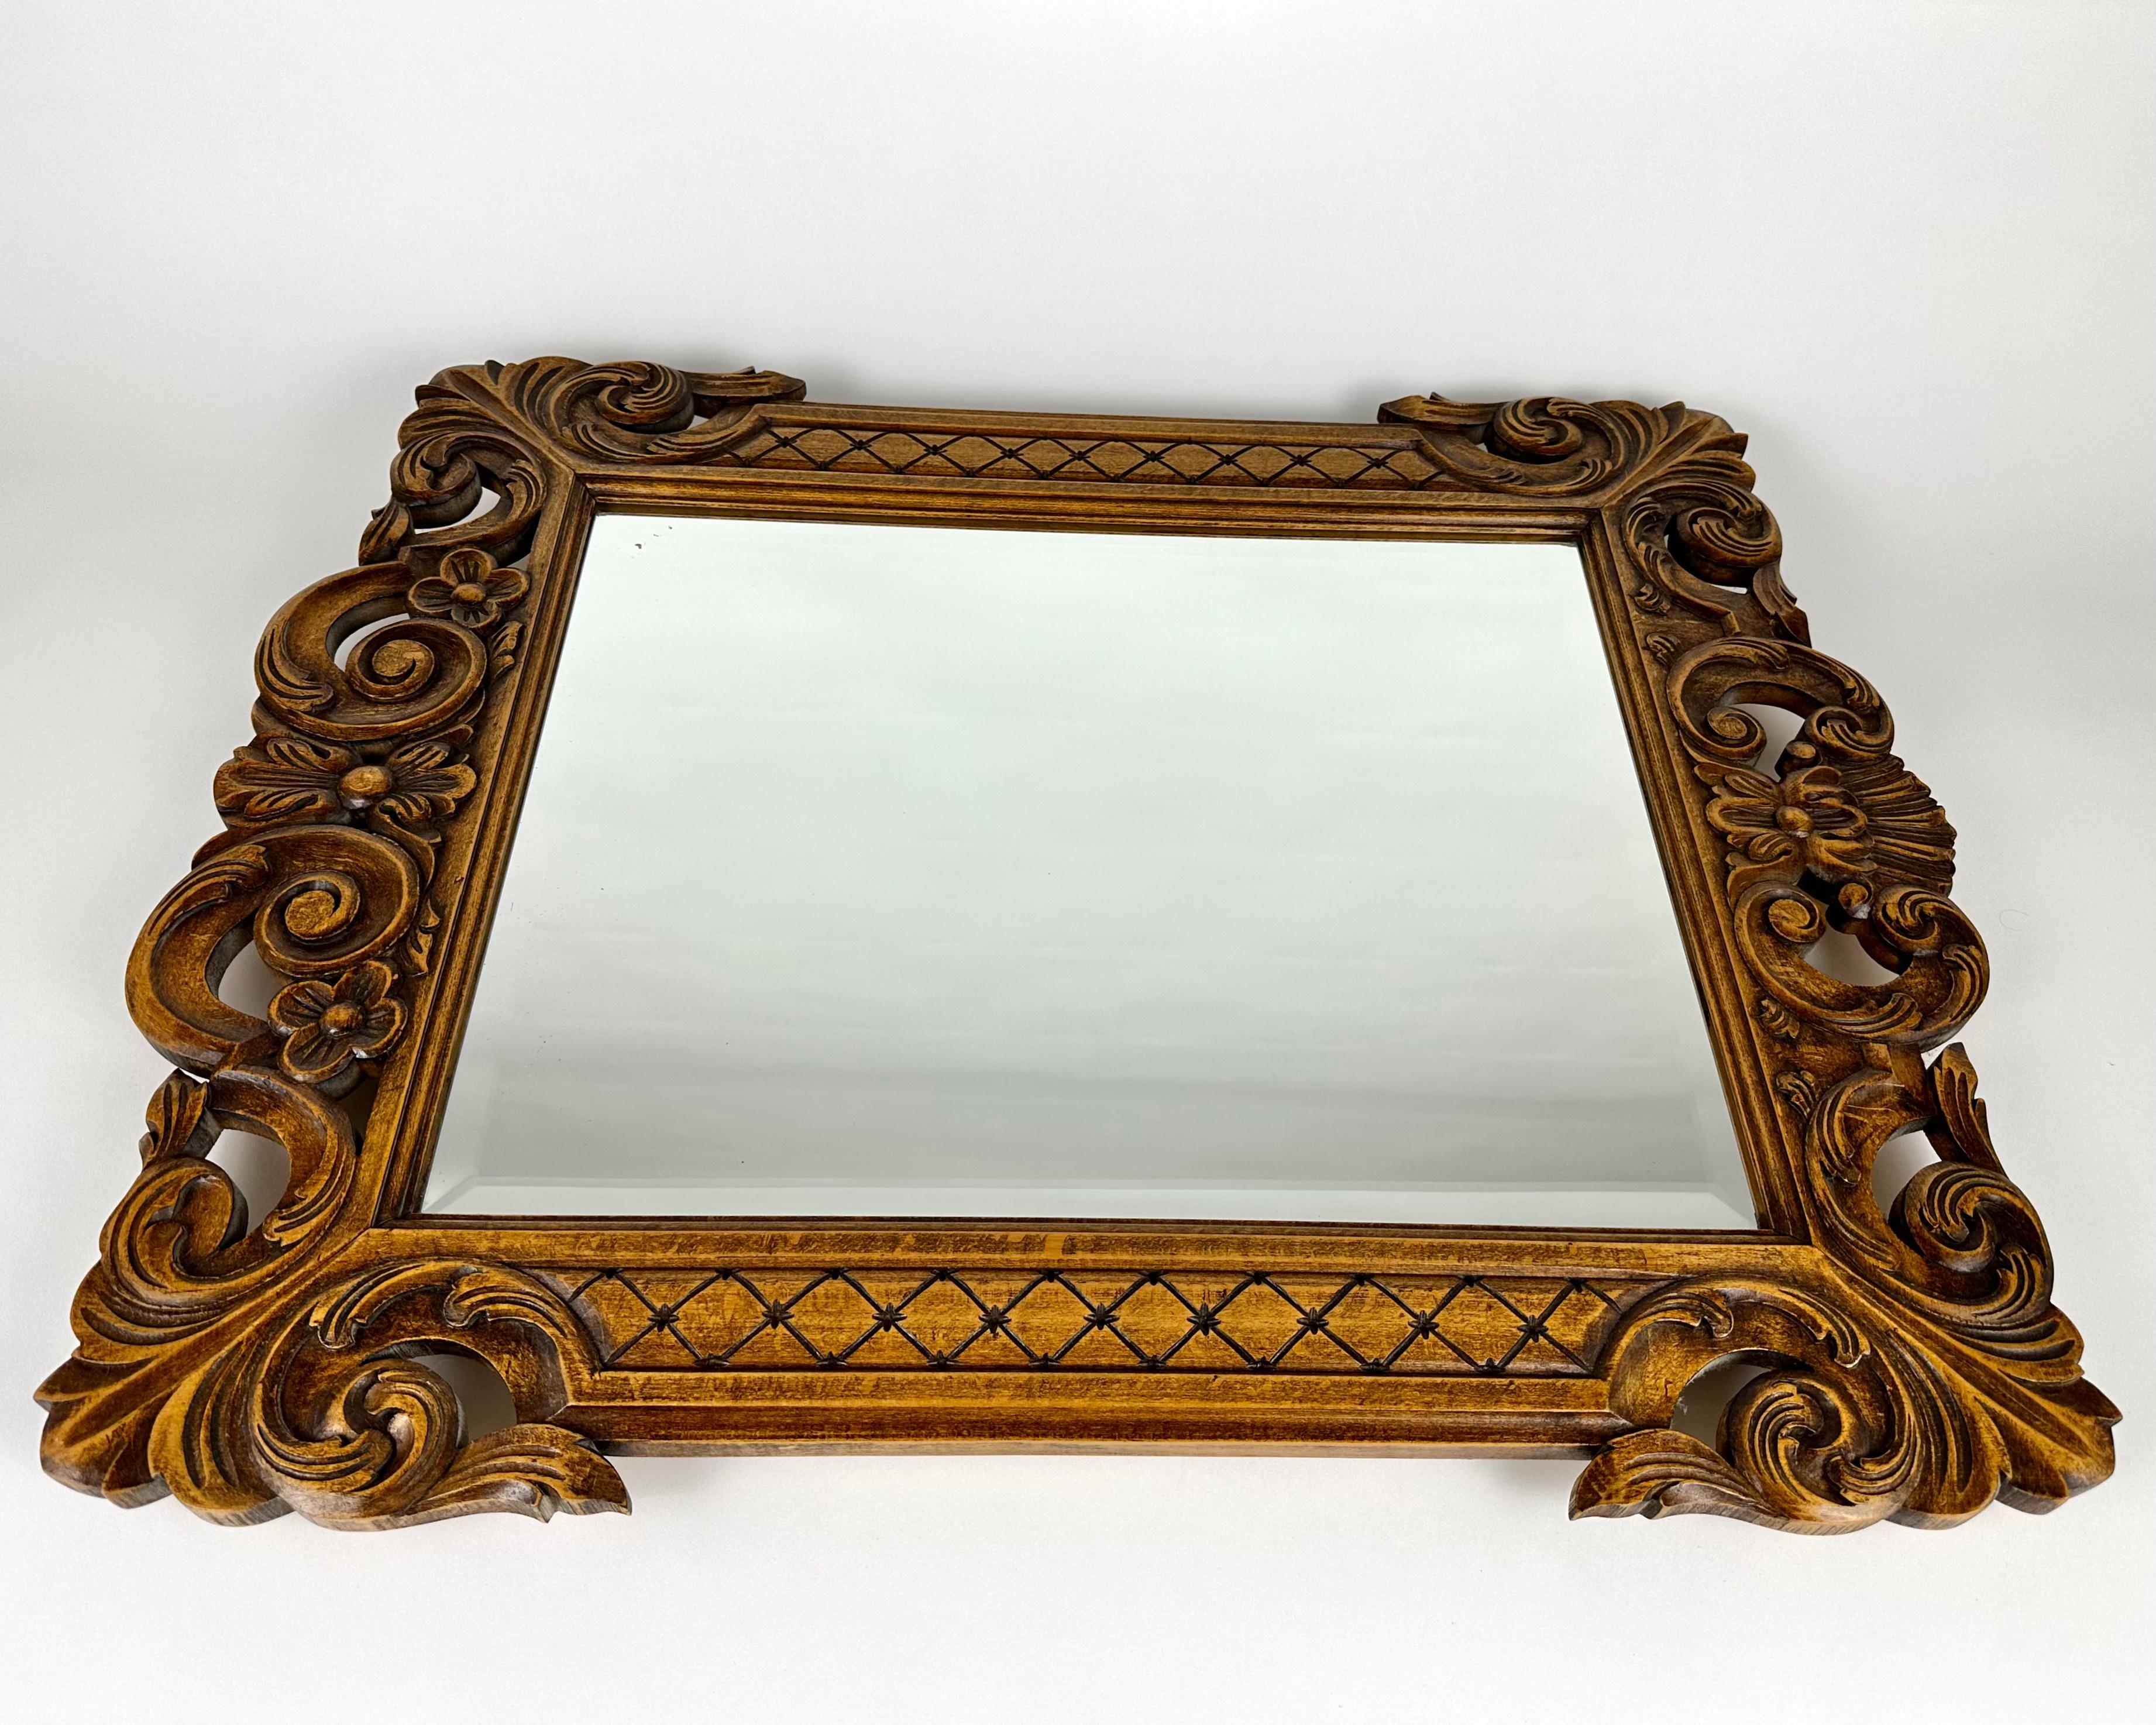 Vintage Faceted Wall Mirror in Carved wooden frame, mid-20th century.

The rectangular shaped mirror with pierced scrolled acanthus cresting and flanked by pilasters and floral festoons.

Very detailed and finely carved by craftsmen.

Baroque